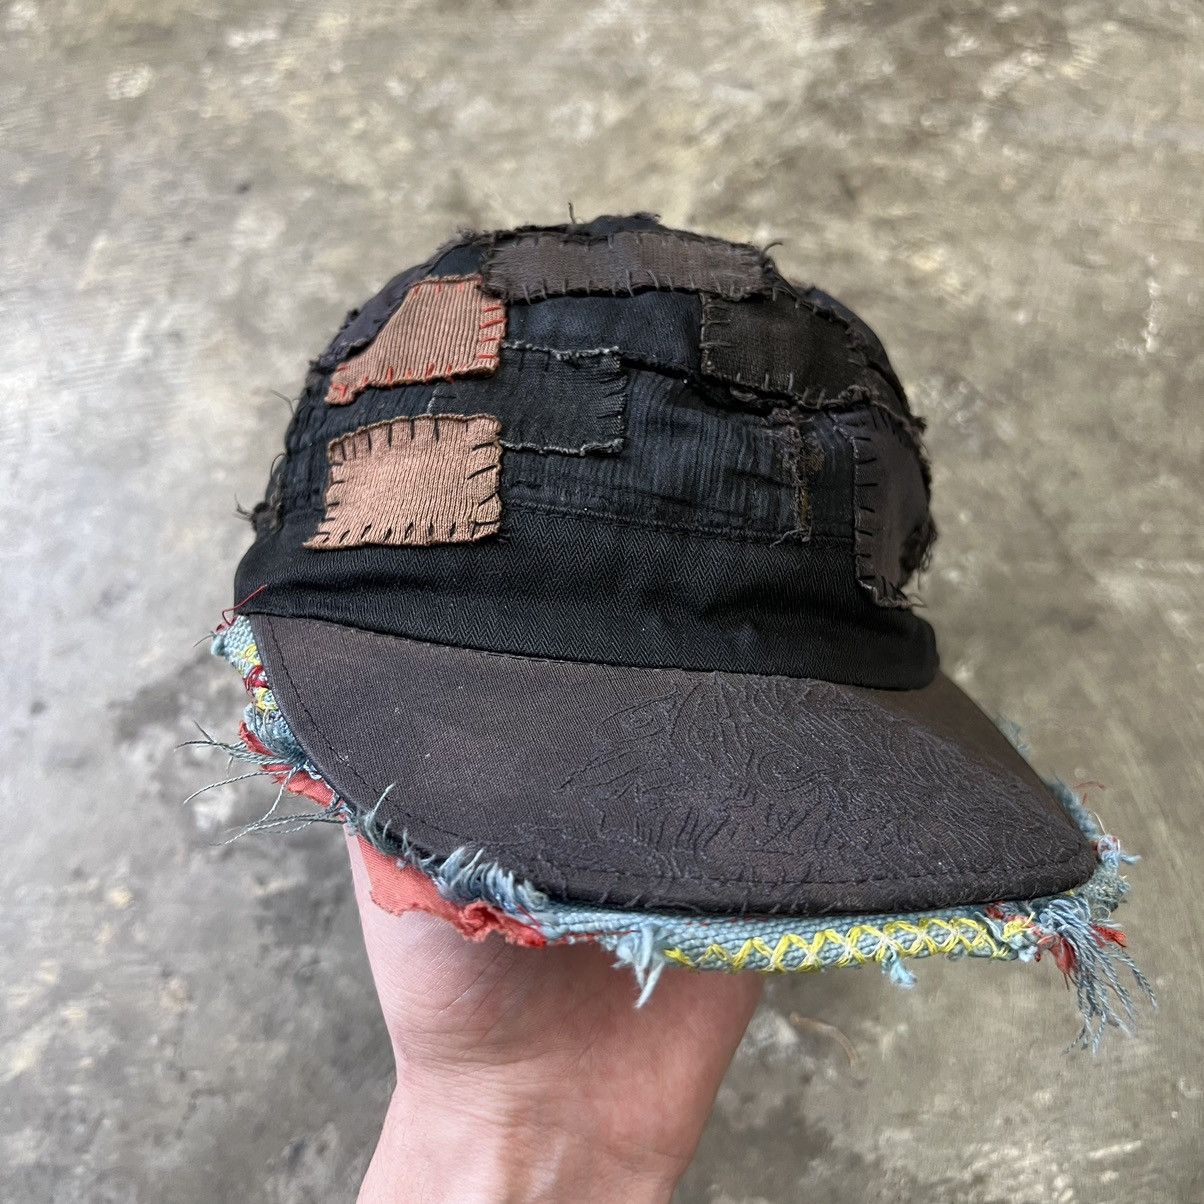 Undercover Undercover SS03 “Scab” Patchwork Hat | Grailed